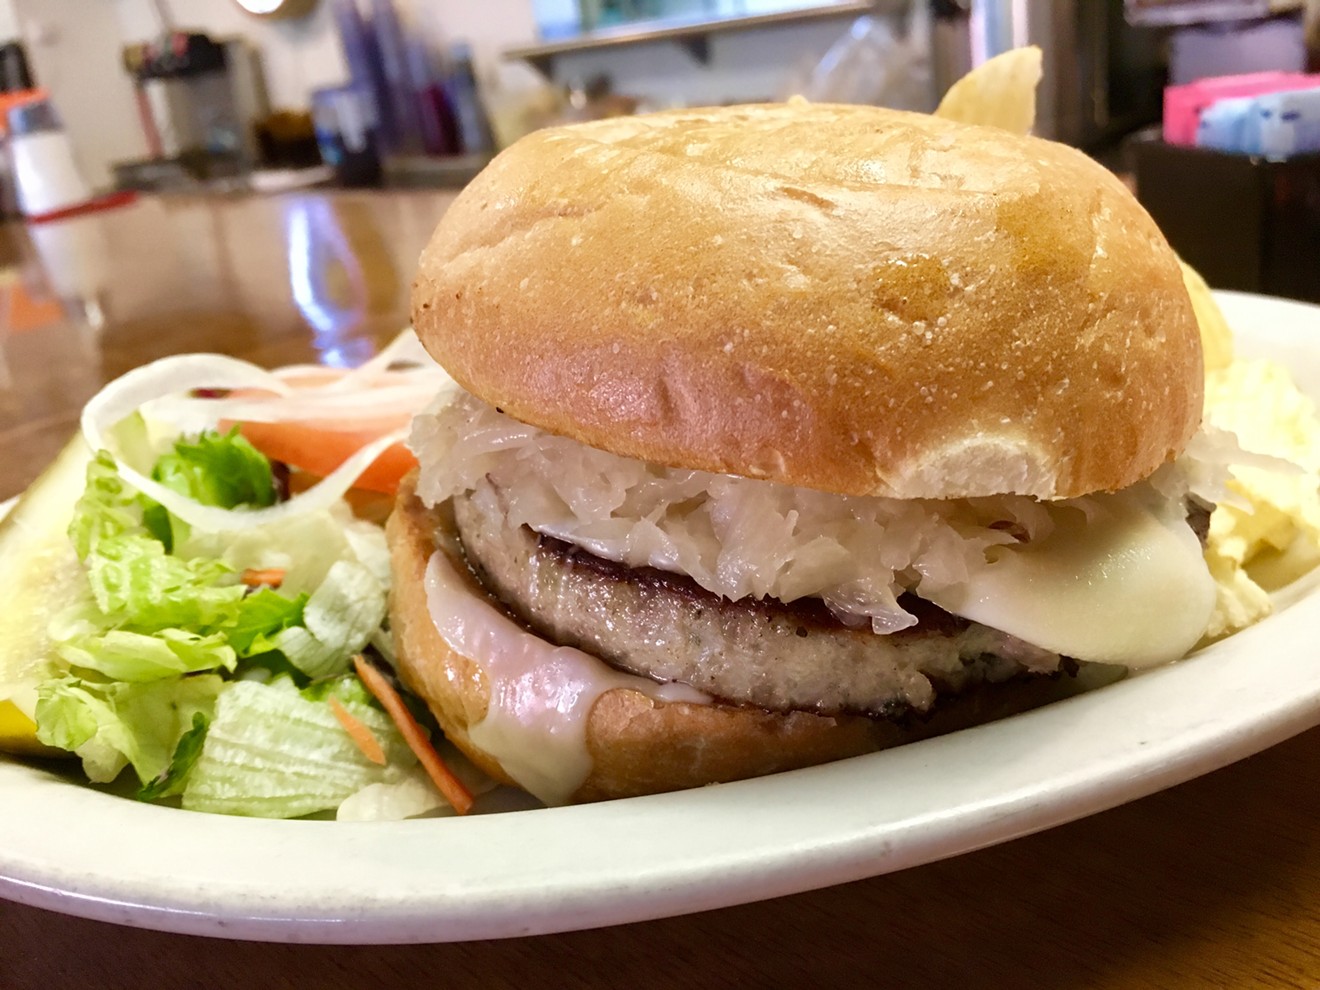 The German Burger at Henk's European Deli, with Swiss cheese and sauerkraut, is $7.25.